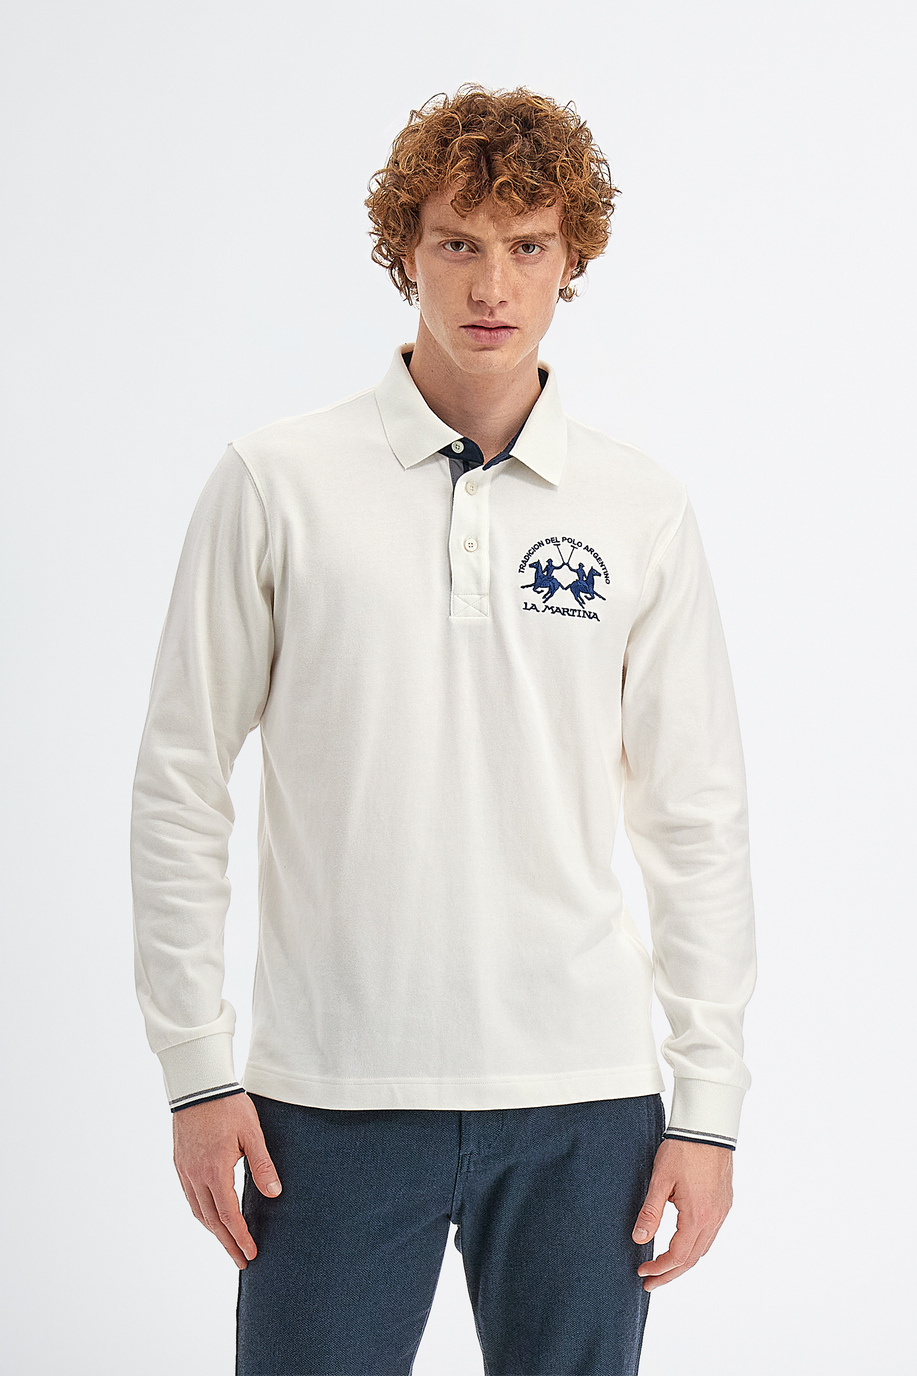 Men’s polo shirt in cotton jersey long sleeves slim fit - Slim fit | La Martina - Official Online Shop